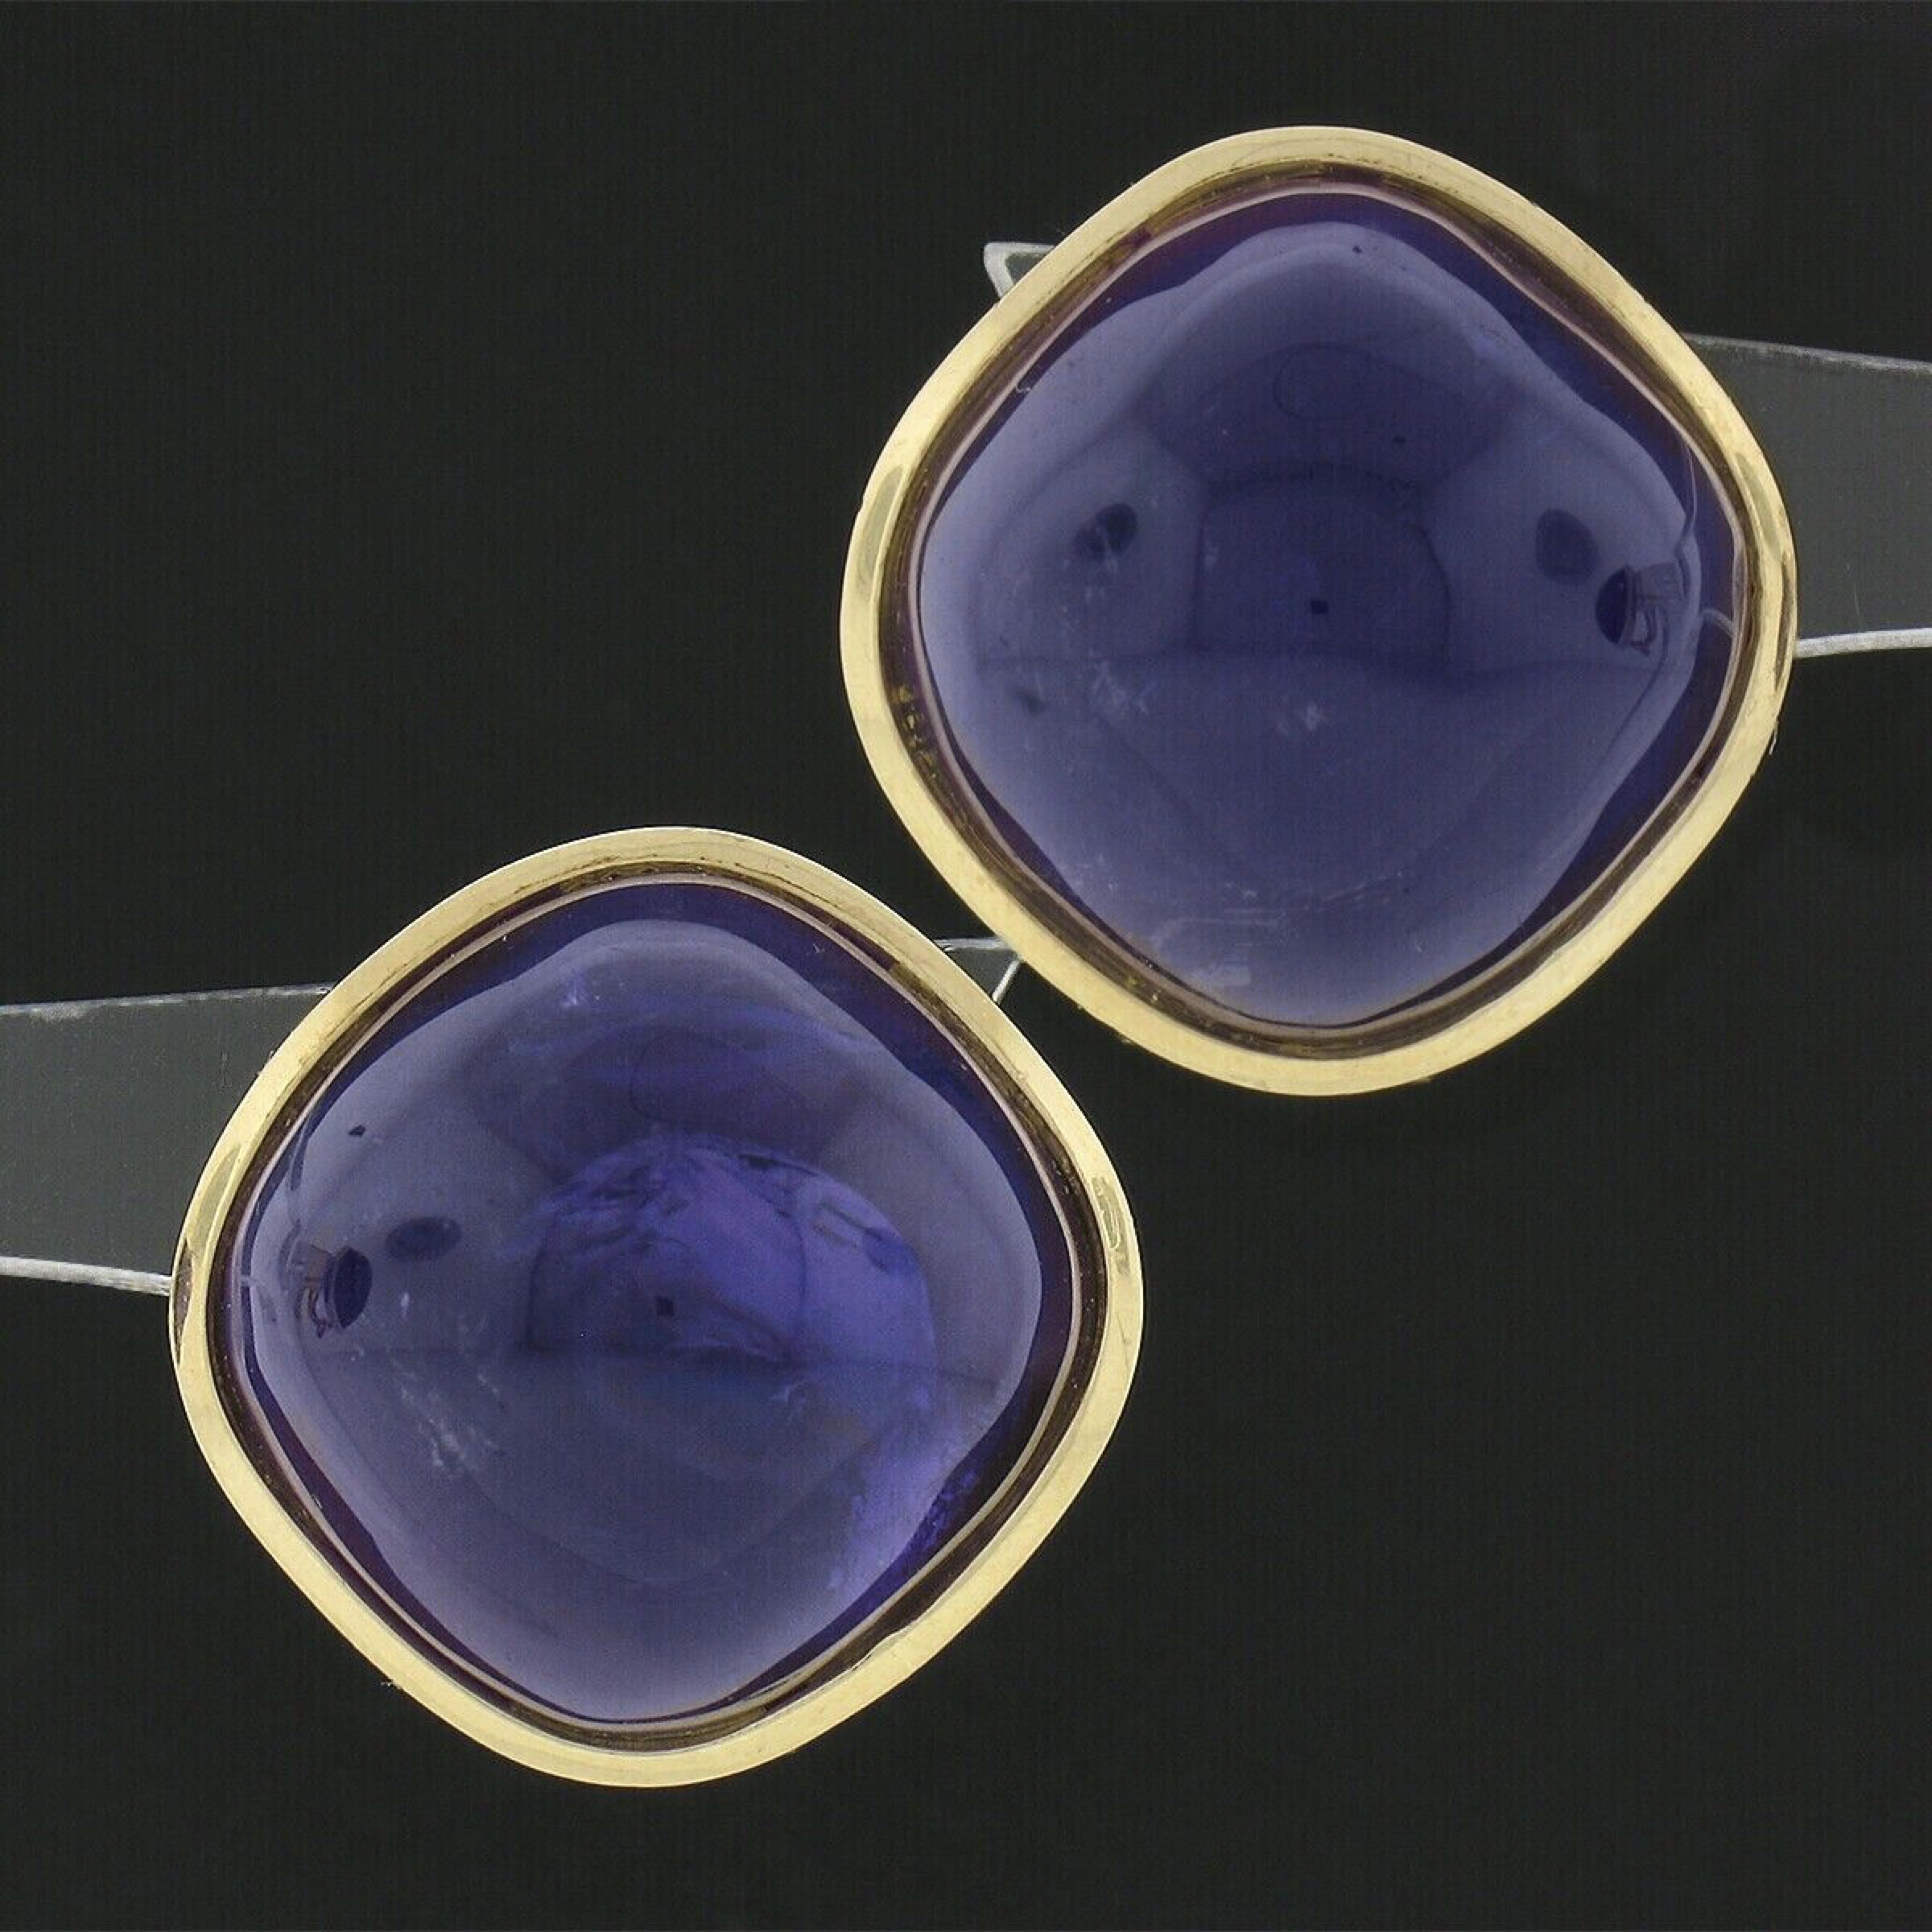 You are looking at gorgeous vintage pair of earrings that are crafted in solid 14k yellow gold and feature a button style that carries large and absolutely amazing amethyst stones at their center. These fine stones are cabochon cut with a domed and